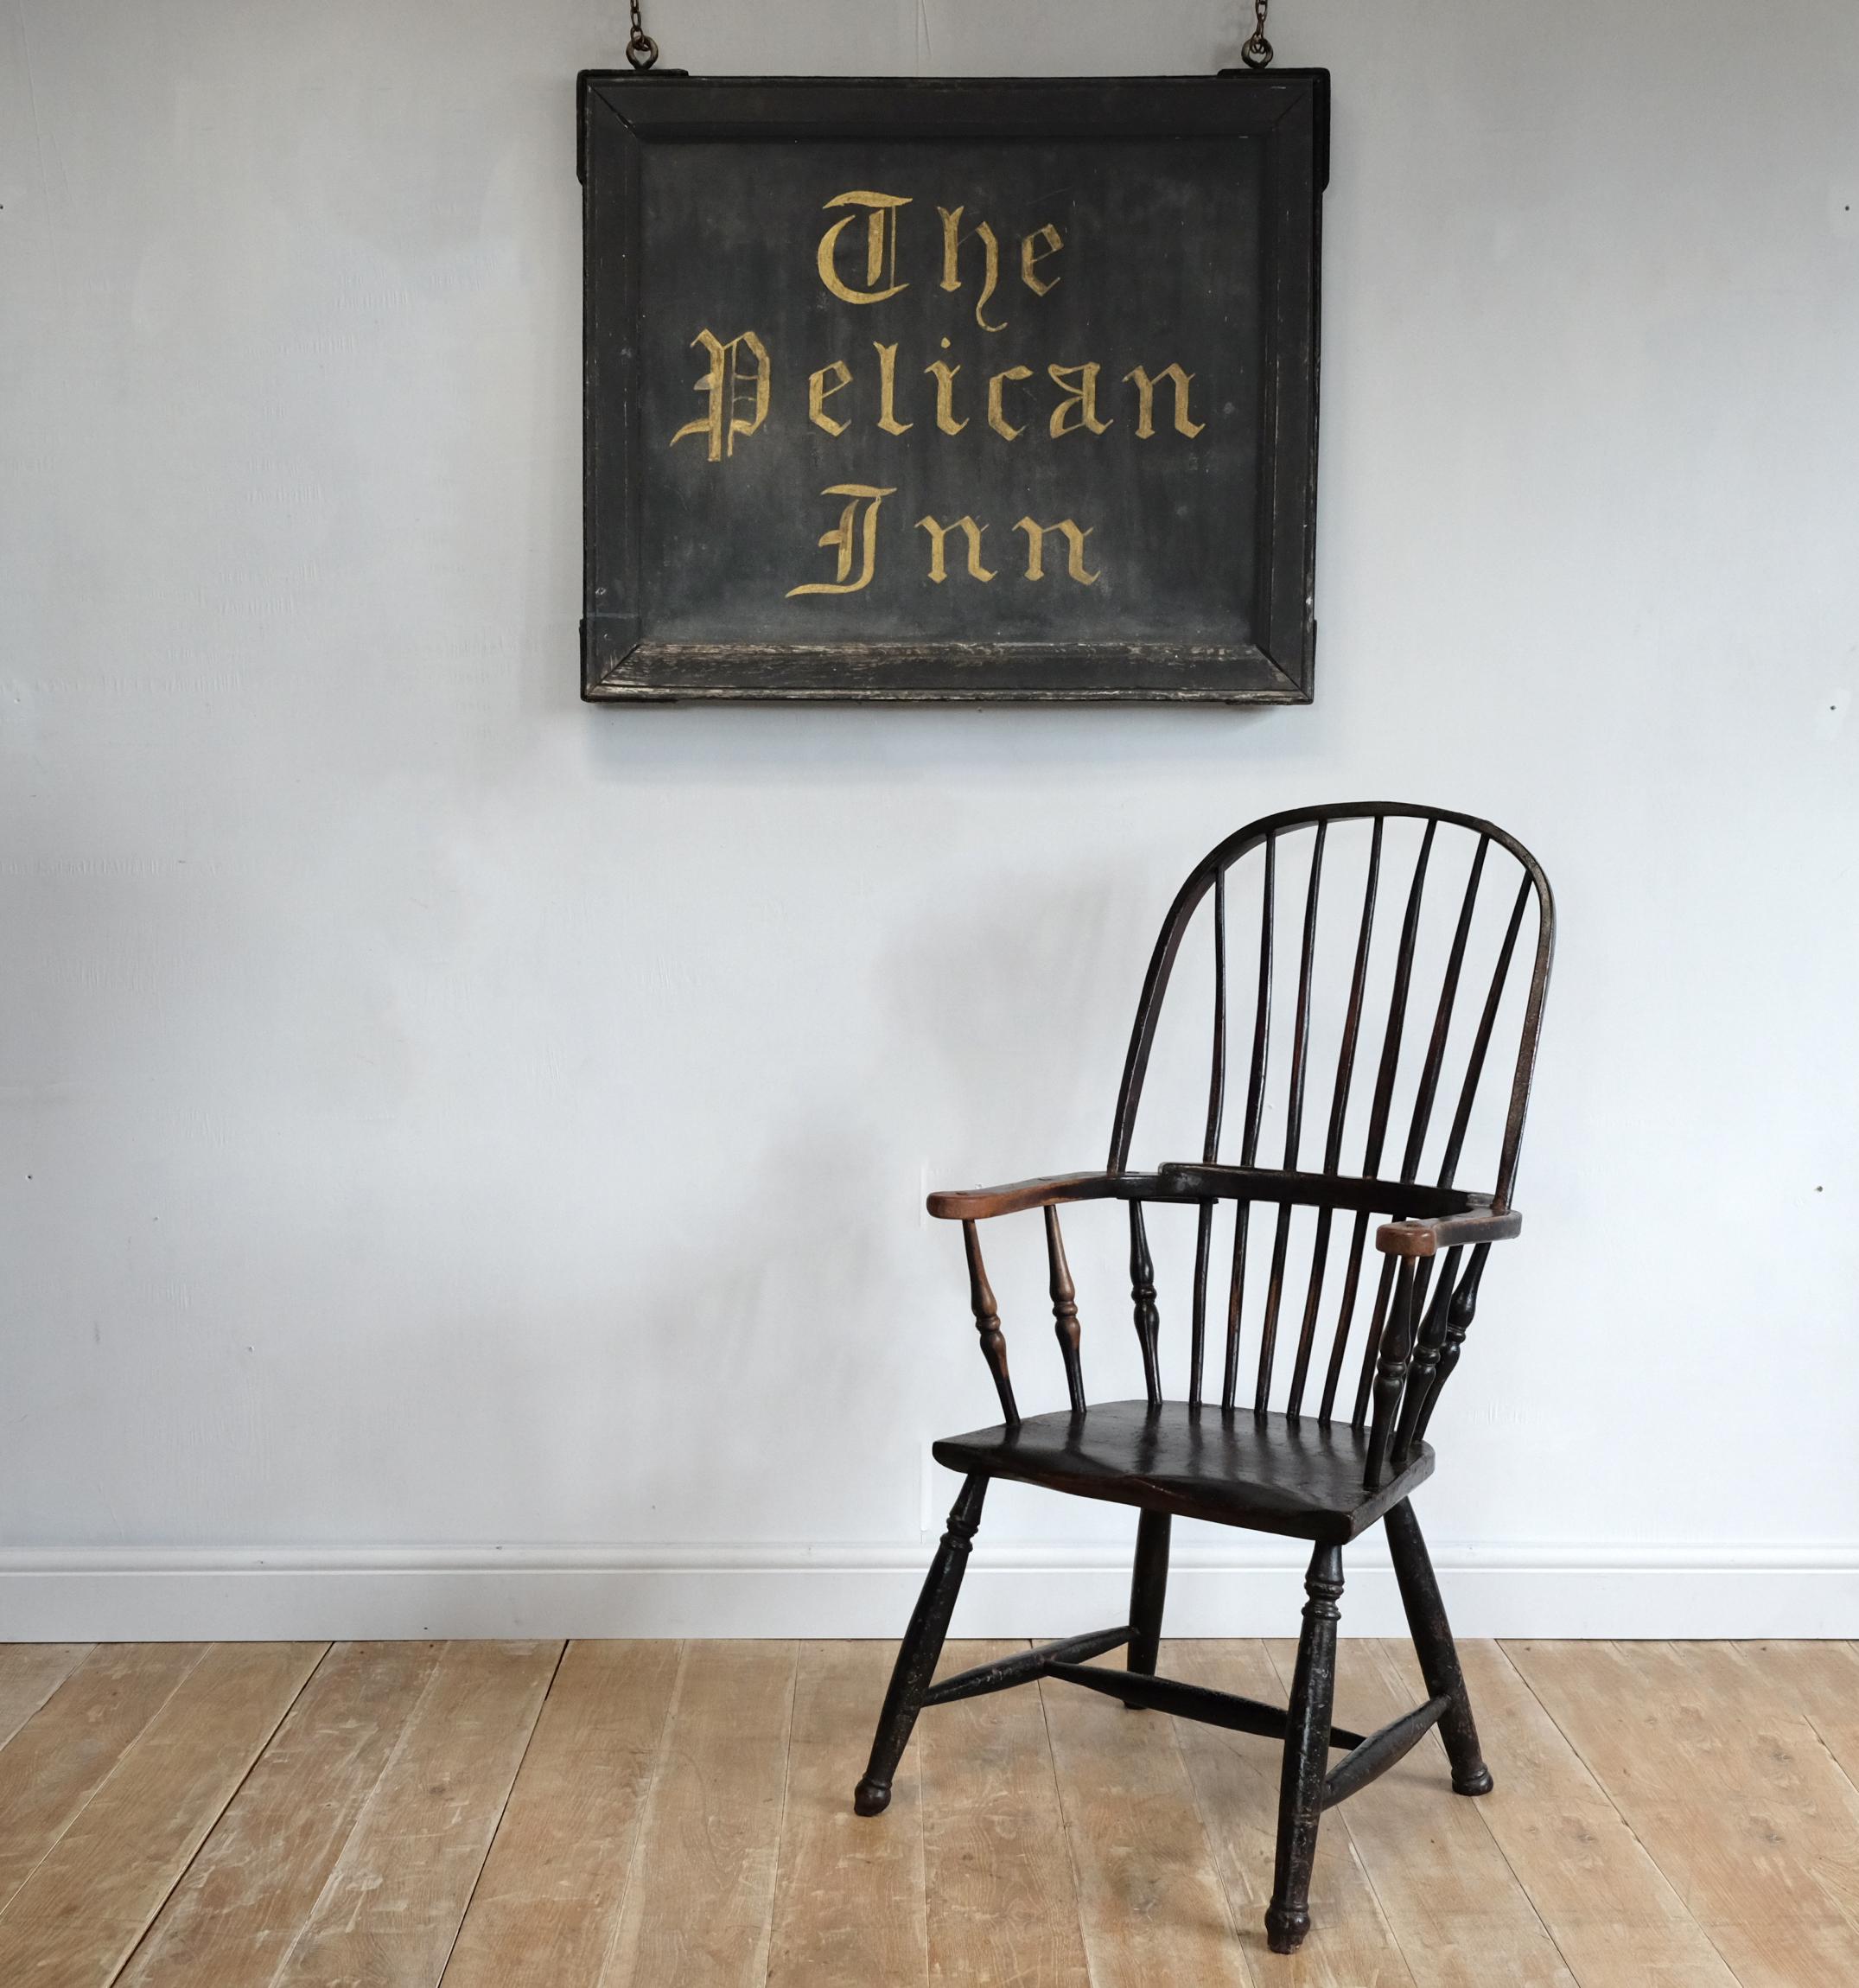 A large original hand painted sign for the Pelican Inn, believed to be from the Pelican Inn in Stapleford near Salisbury, England. Gilt lettering on black background in heavy painted timber frame, with original hanging loops. Charming faded